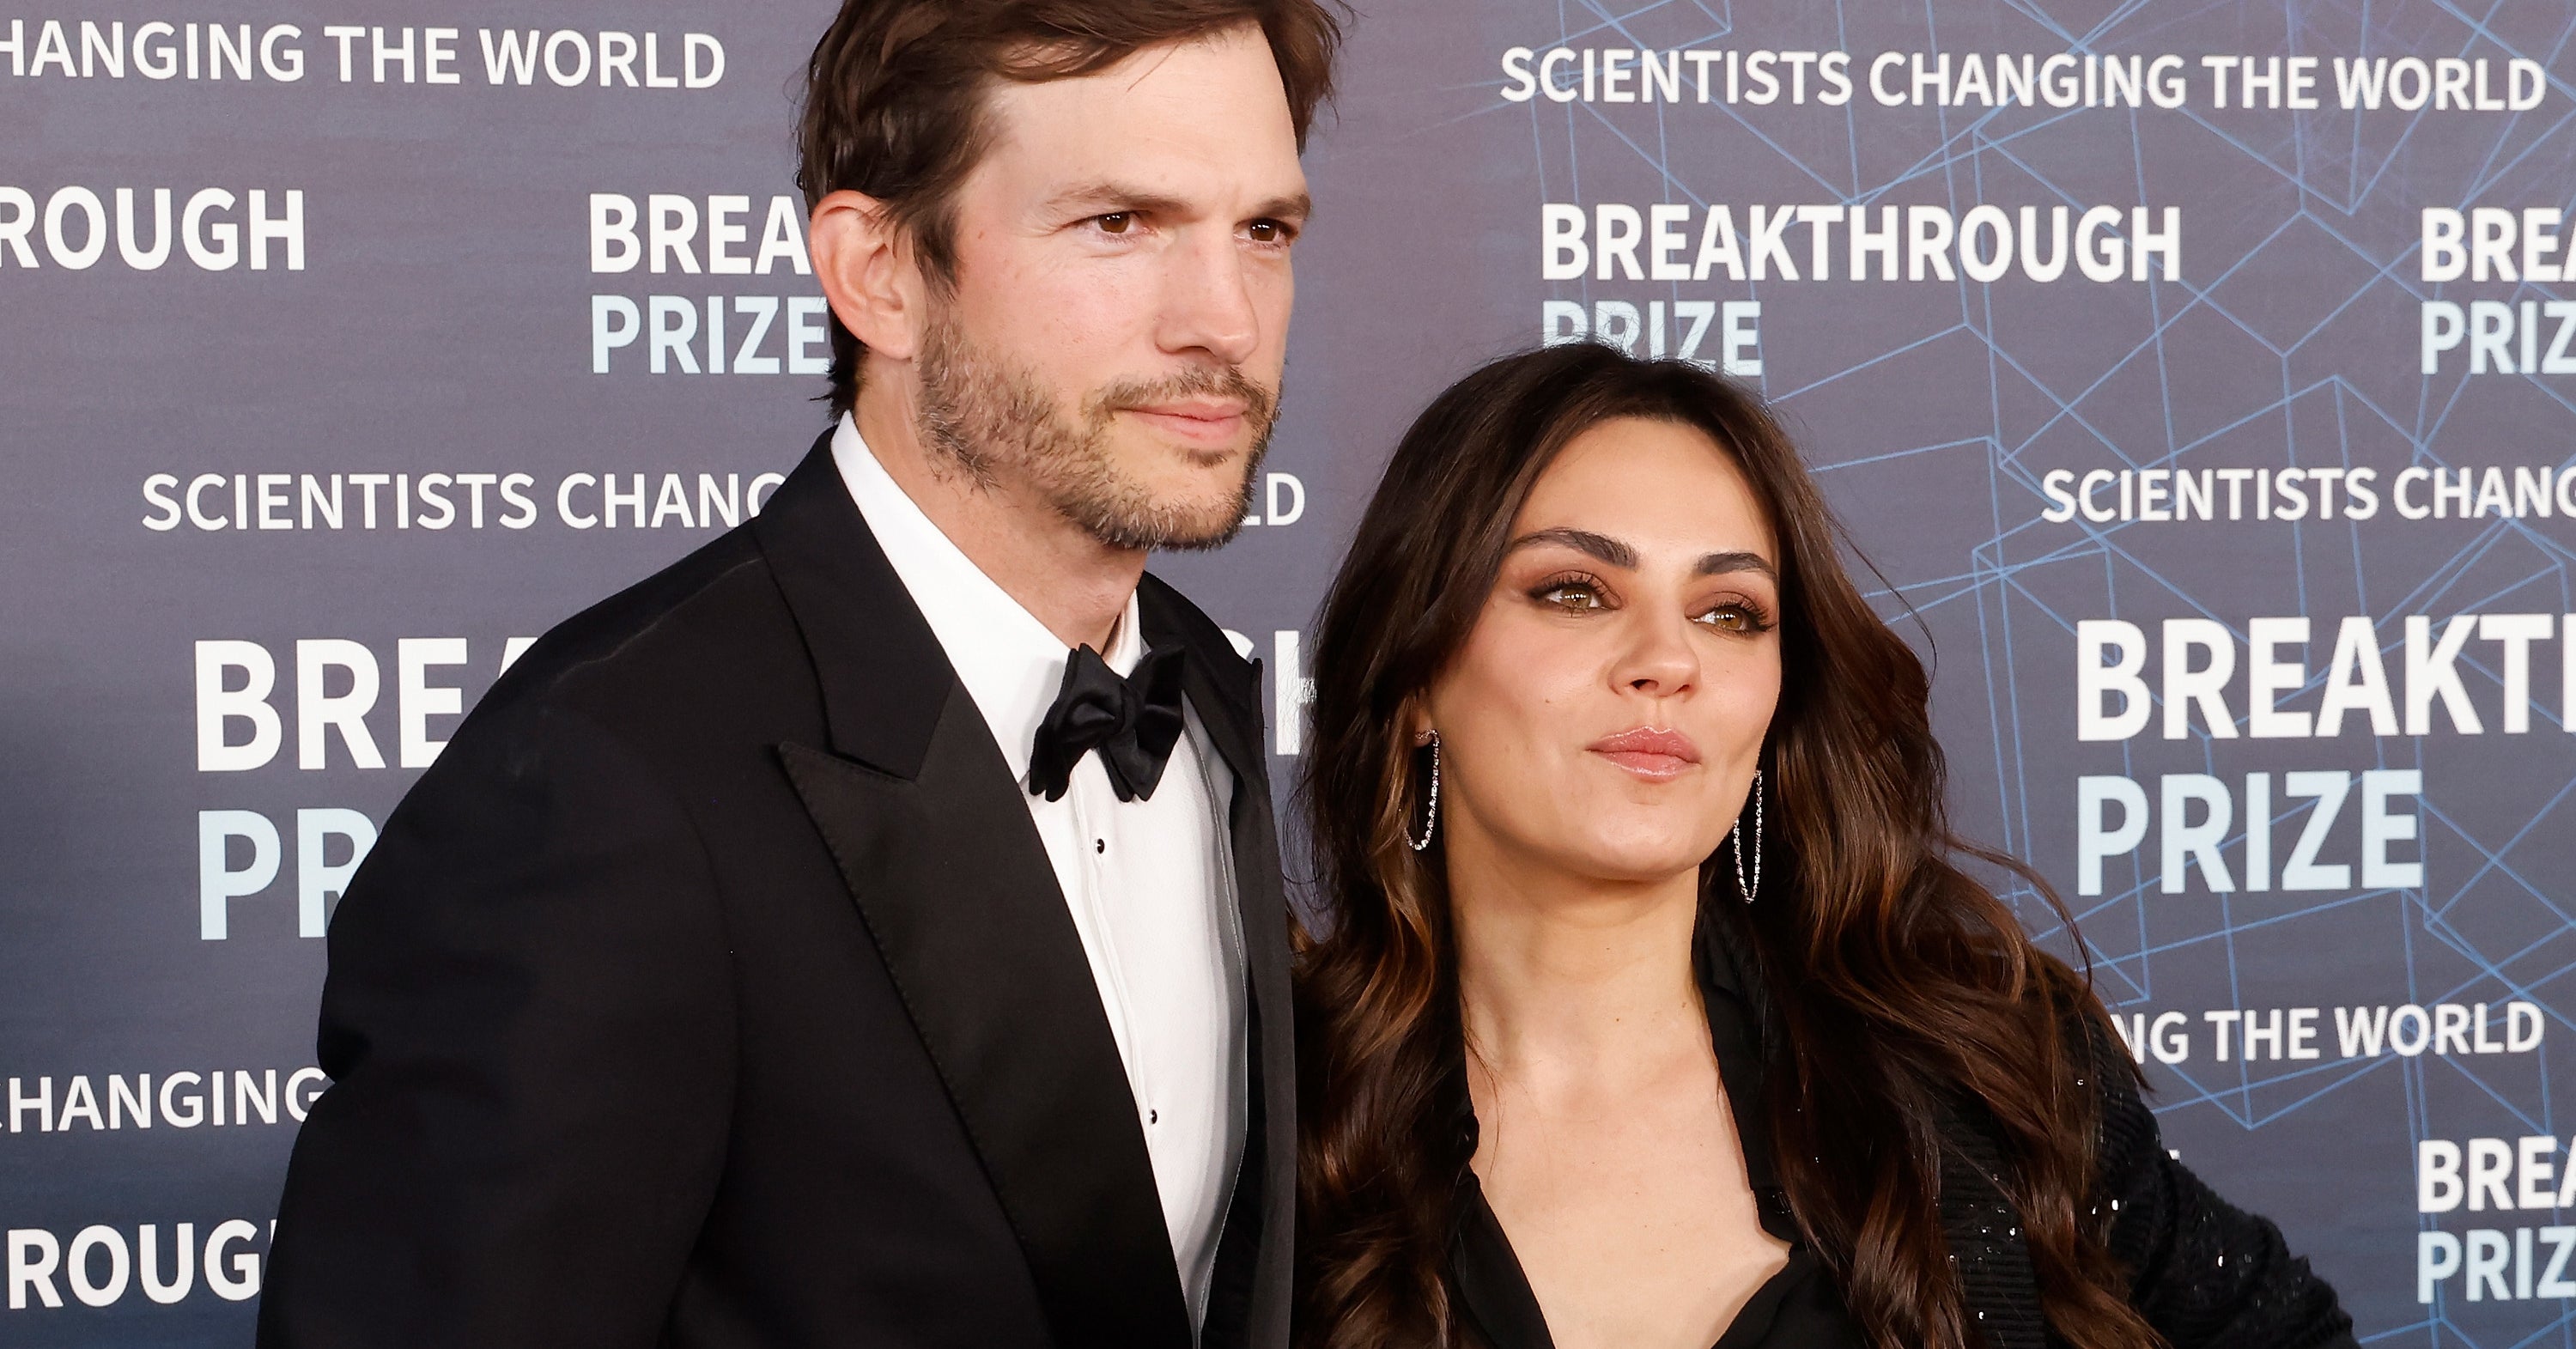 Mila Kunis Confirmed That She And Ashton Kutcher Won't Return For Season 2 Of “That ‘90s Show” After The Danny Masterson Backlash